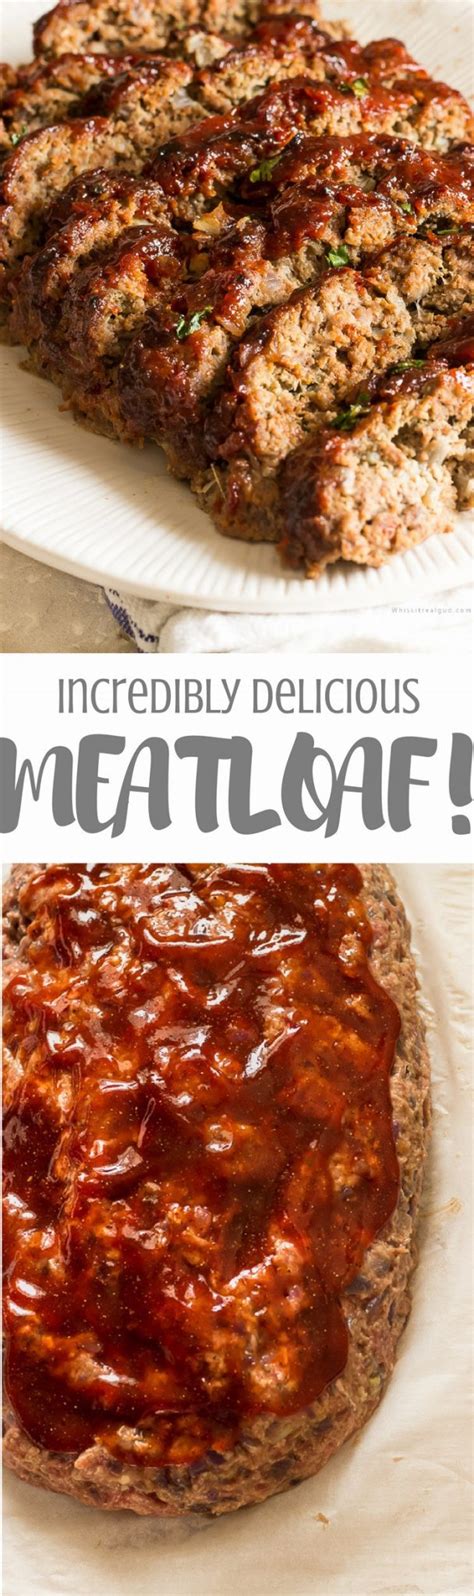 Feb 11, 2017 · if you want to try a different recipe, you can try this version of paleo meatloaf with gravy! 2 Lb Meatloaf Recipe / Meatloaf with Stuffing is a tasty 2 ...